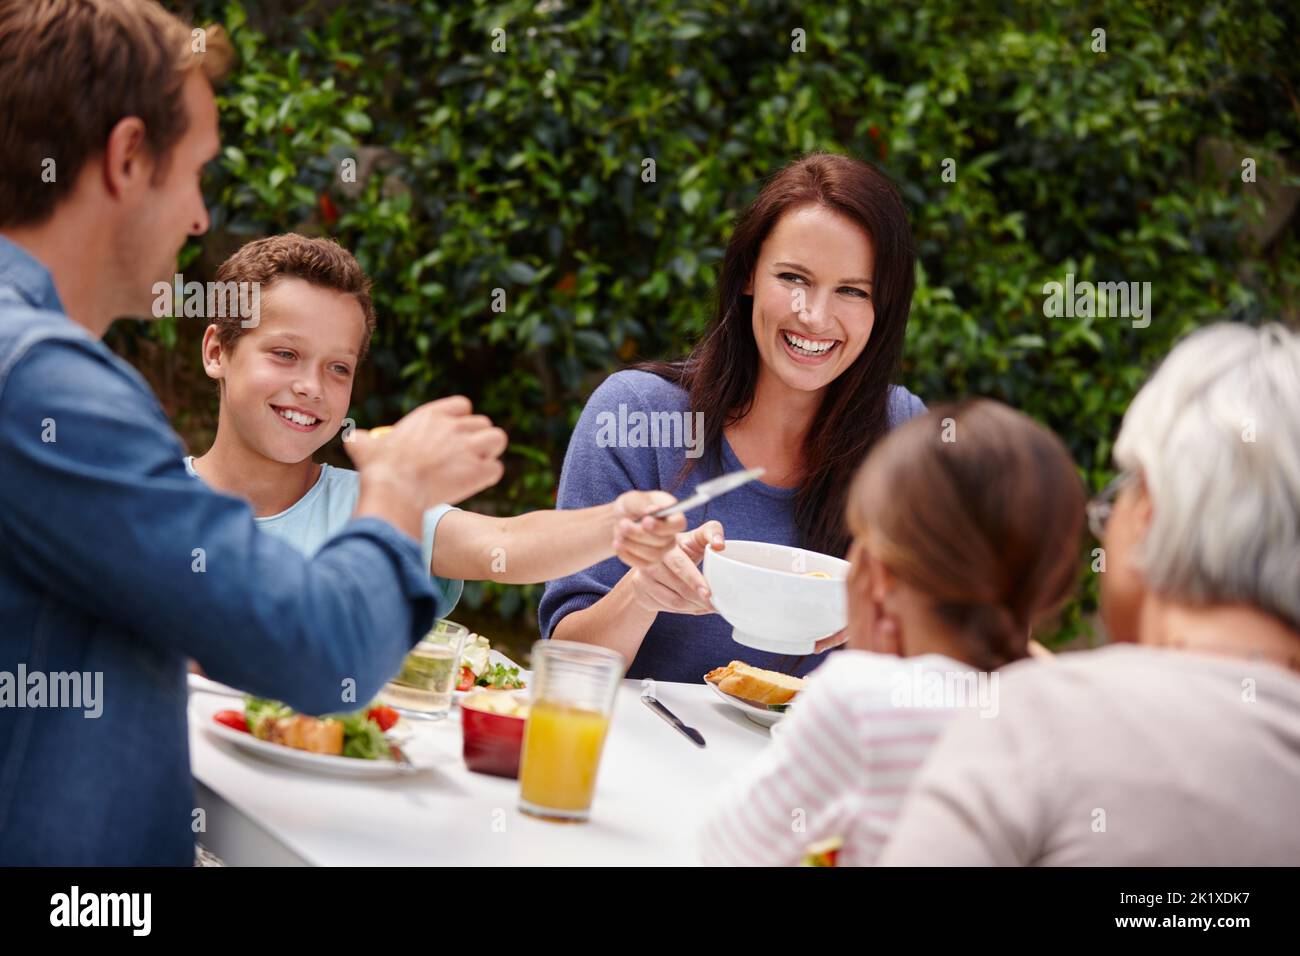 Family is lifes greatest blessing. a happy multi-generational family having a meal together outside. Stock Photo